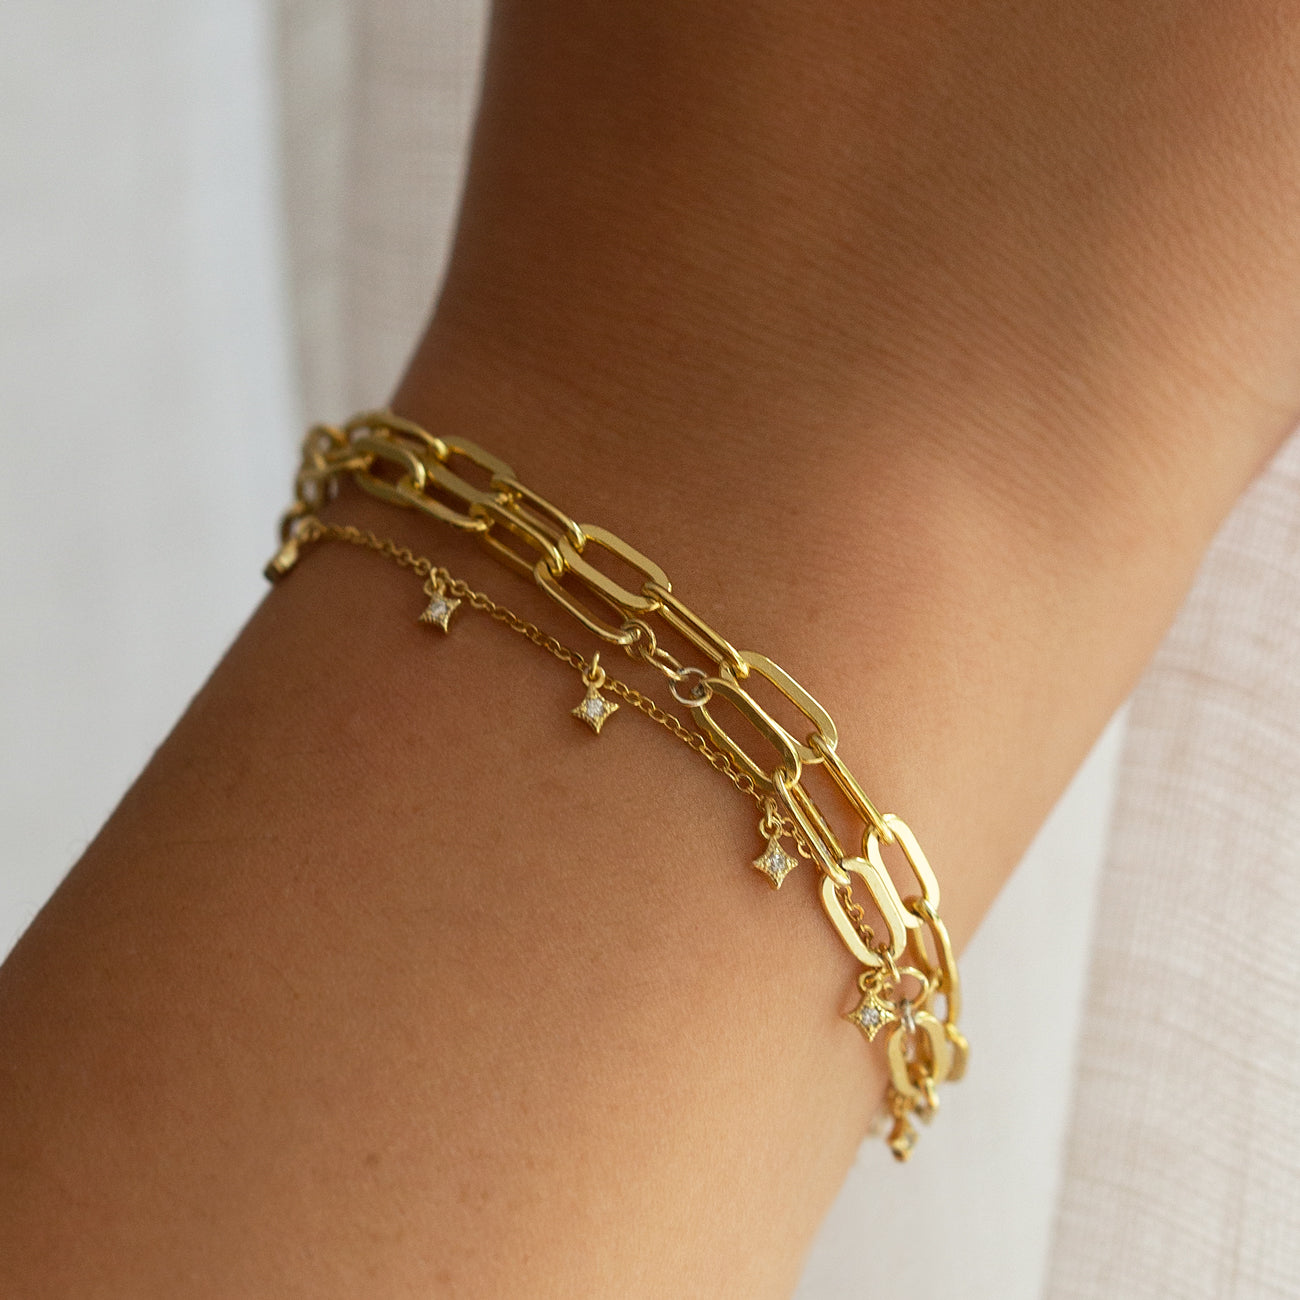 Gold Chain and Dangle Bracelet Stack